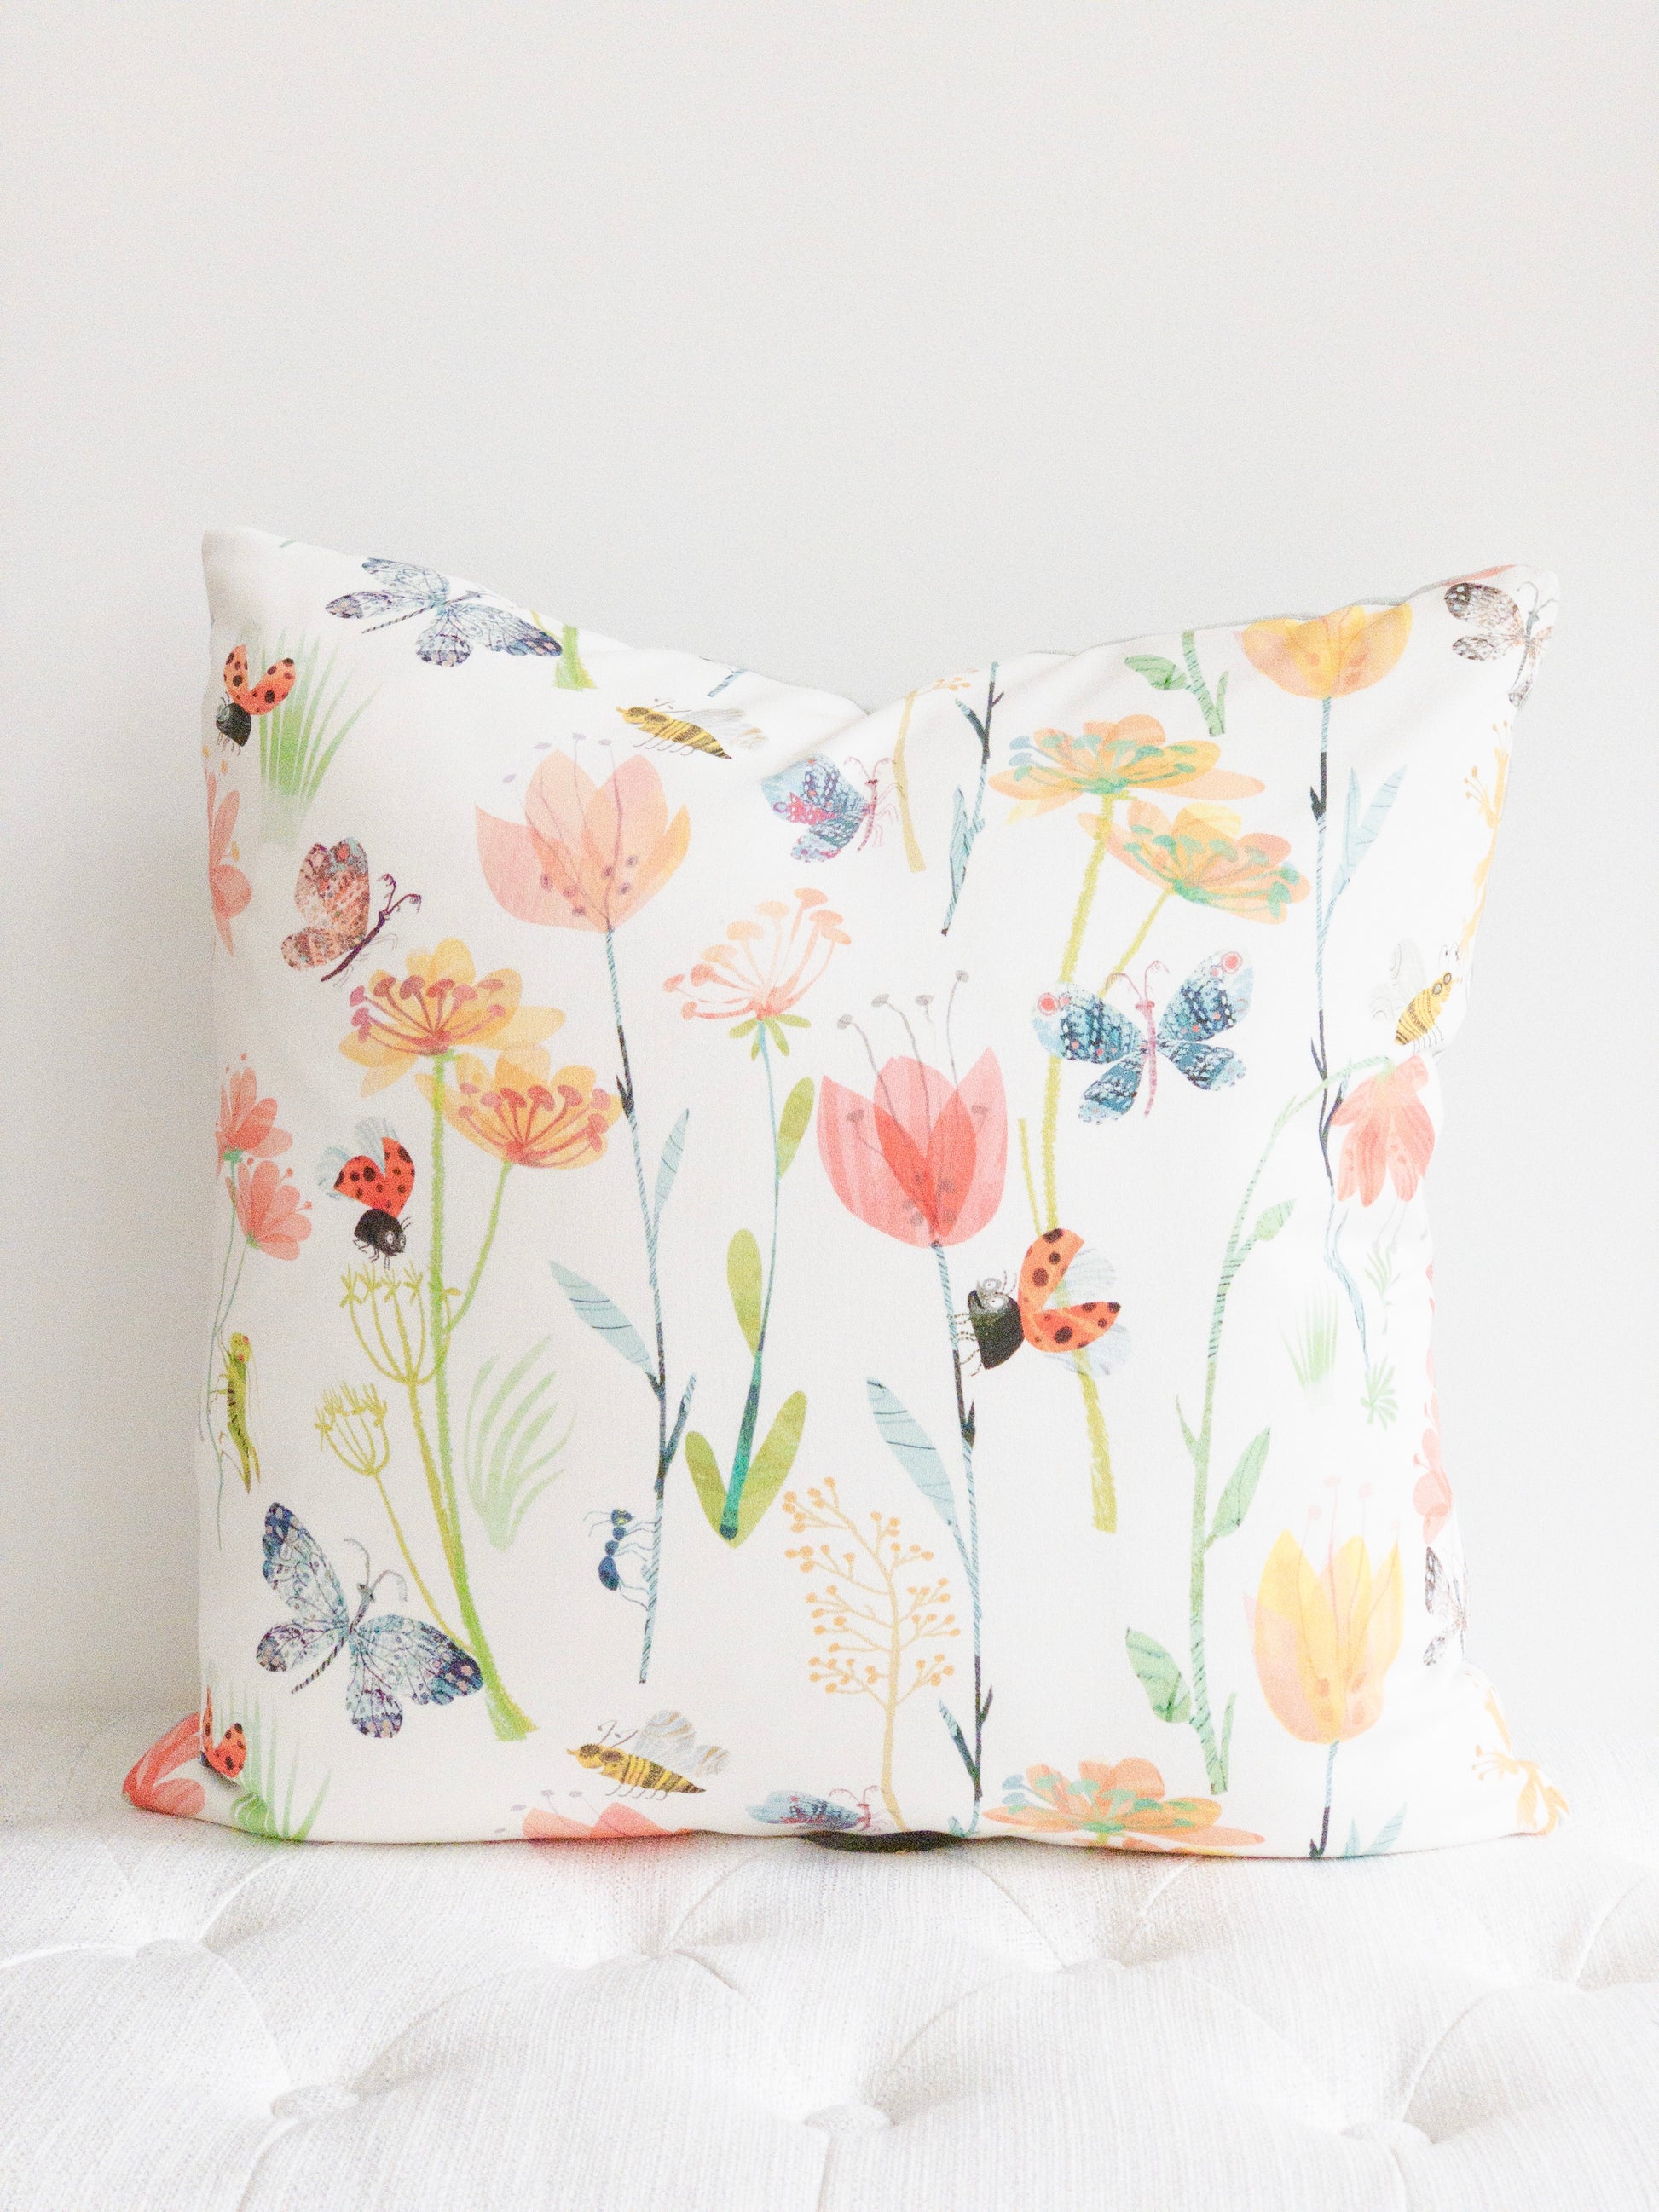 White square decorative pillow with floral and insect motif.  Spring decor floral pillow with white backround.